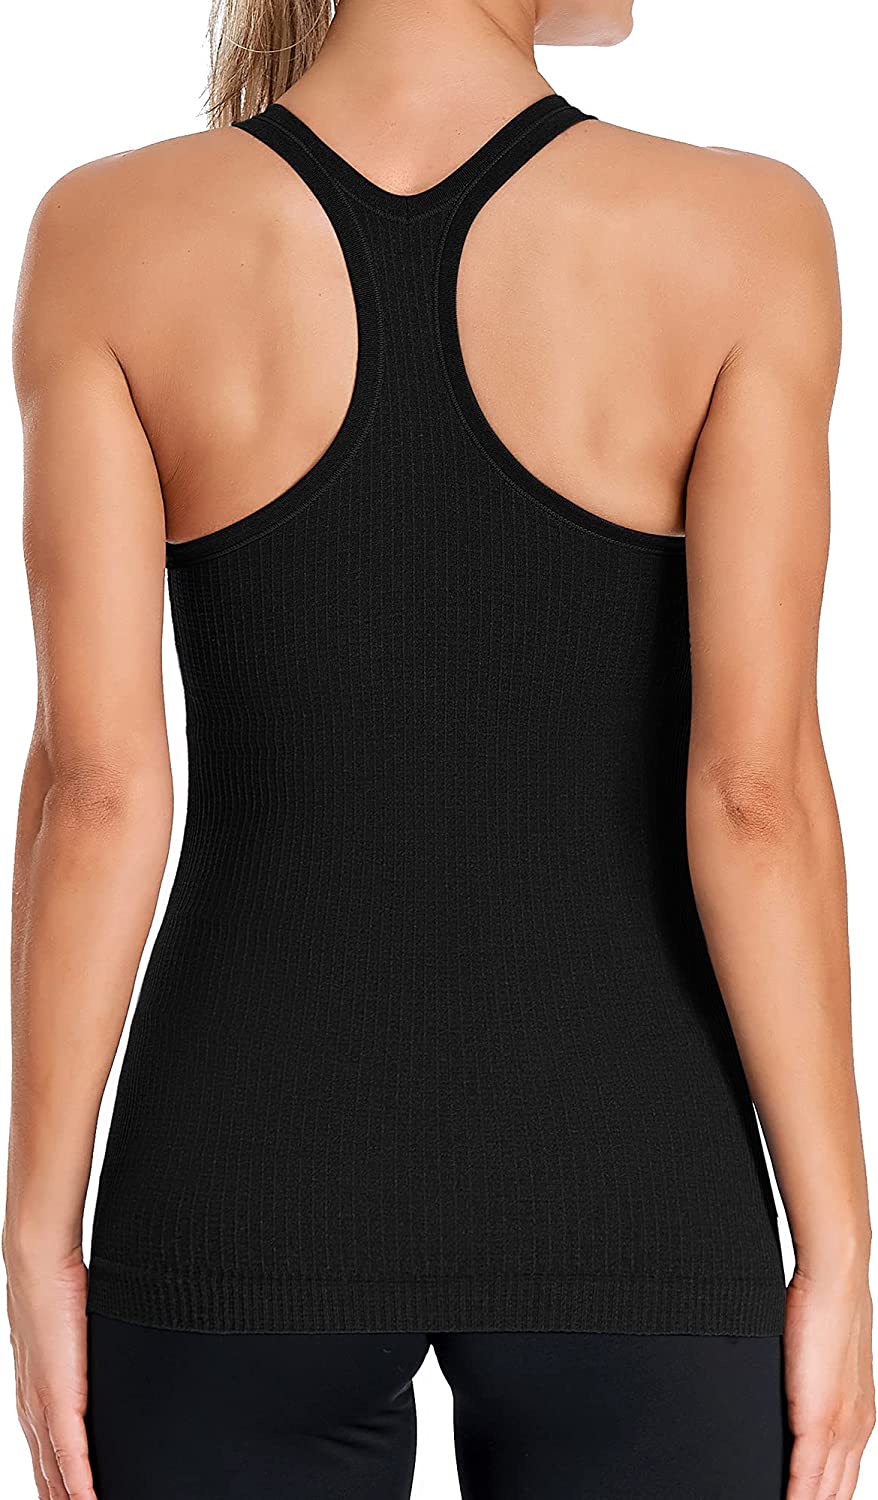 Women's Ribbed Workout Tank Tops with Built in Bra Racerback Athletic Top 